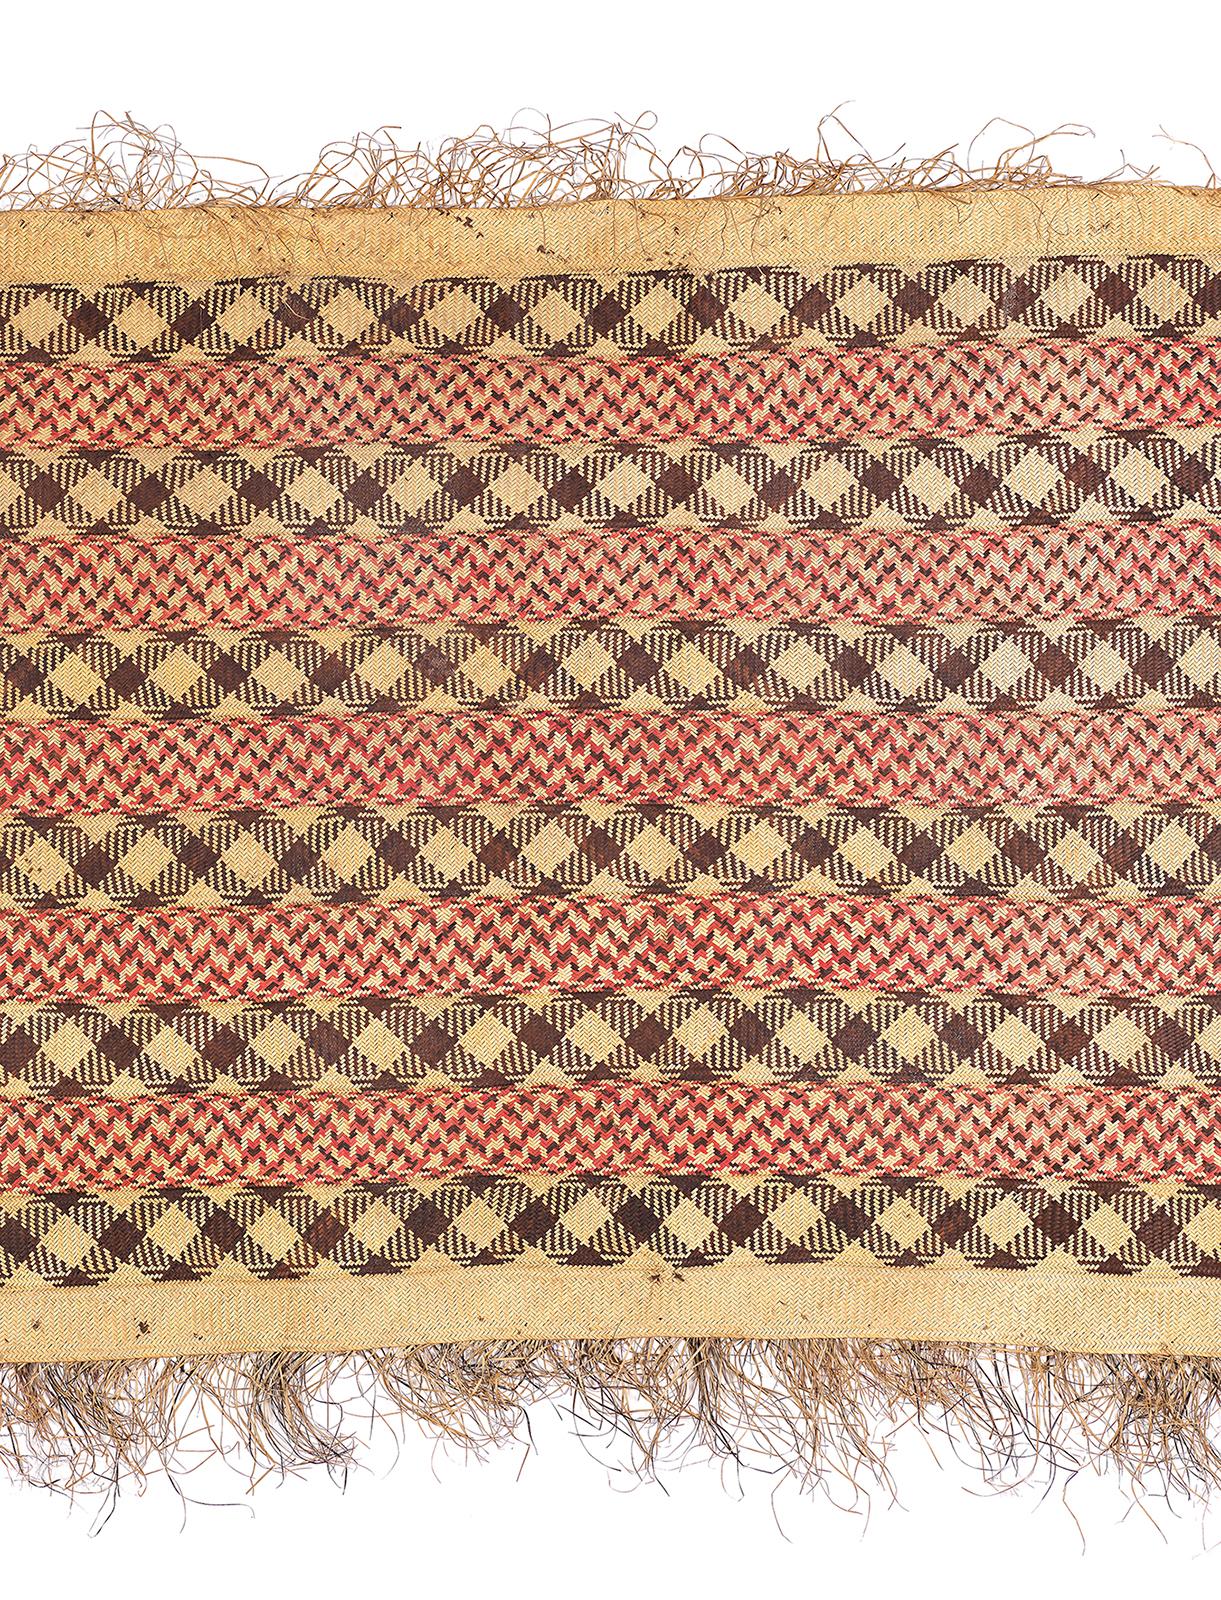 Ceremonial Mat
Zanzibar
Plaited palm Leaf
Circa 1900
Size: 215 x 94 cm 
Collected in the field by a German missionary between 1903 and 1909 
More provenance details are available.